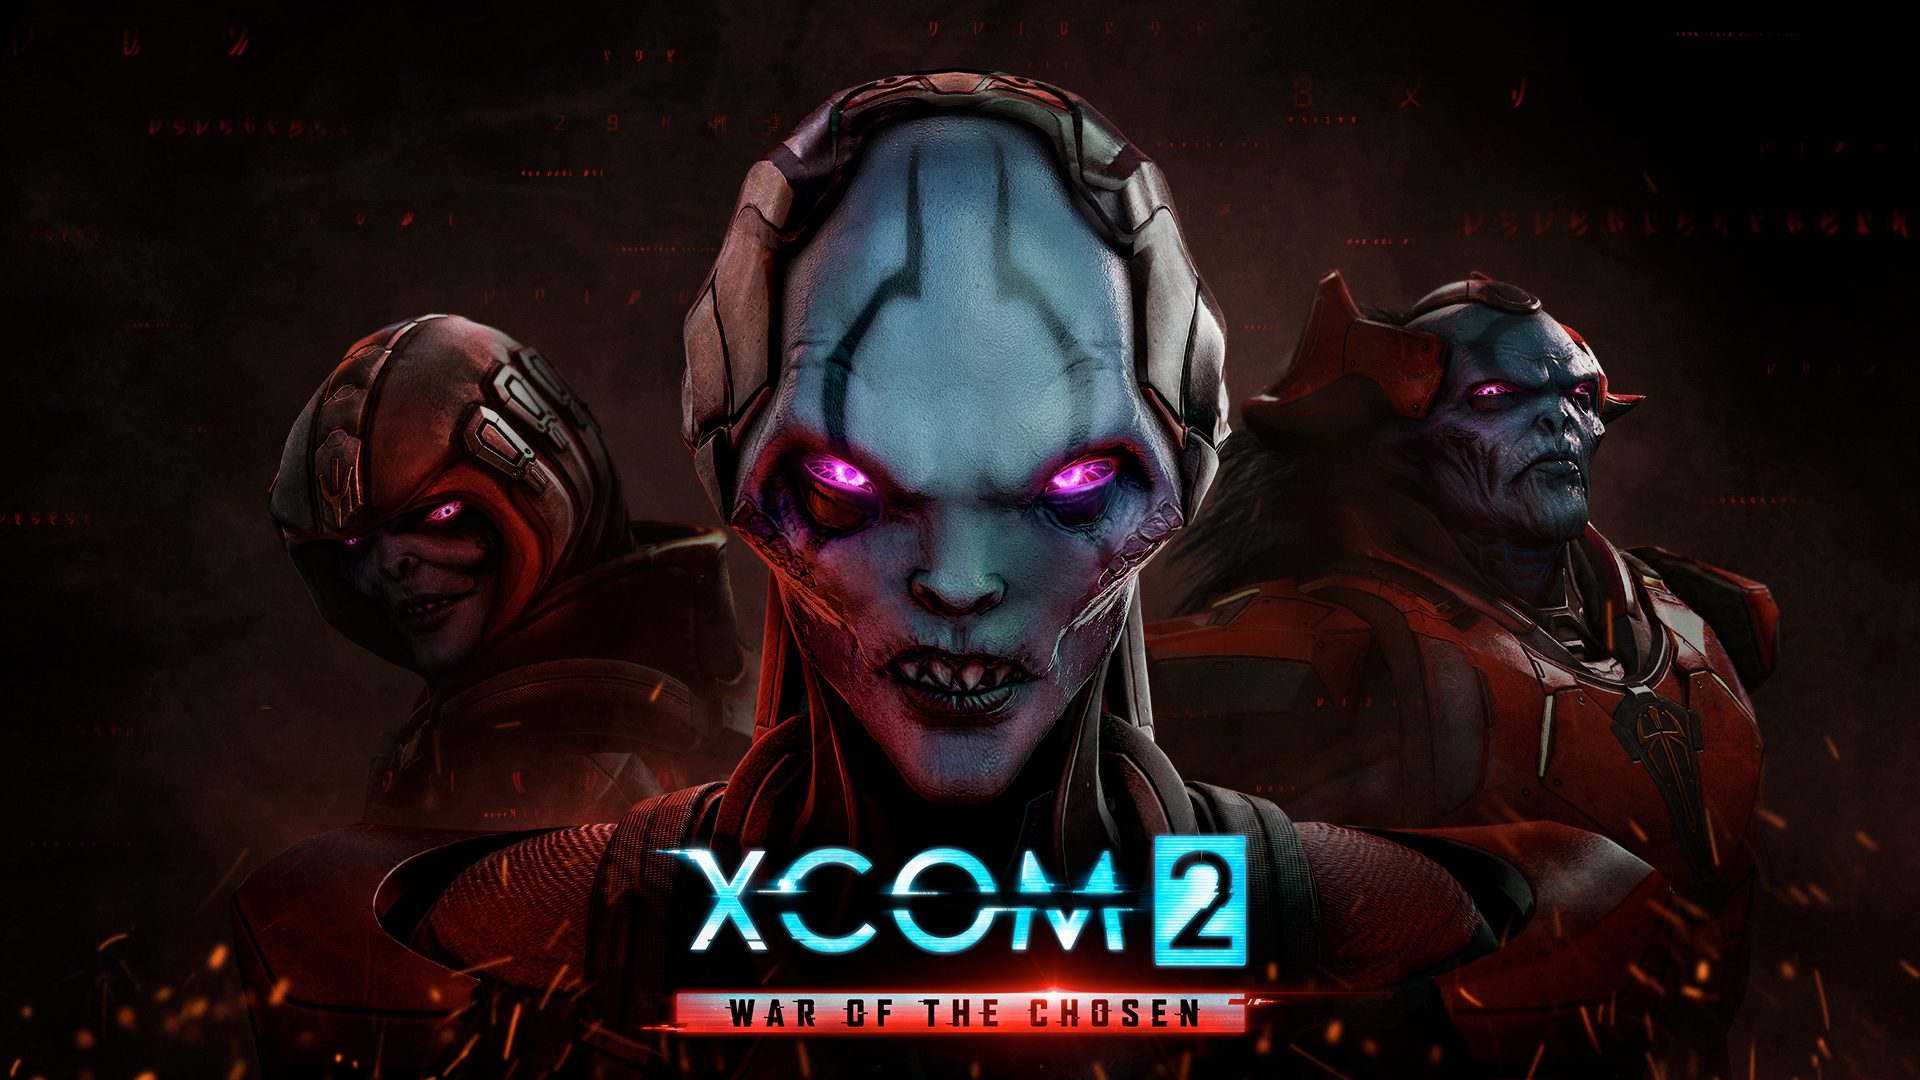 XCOM 2 expansion ‘War of the Chosen’ is available now